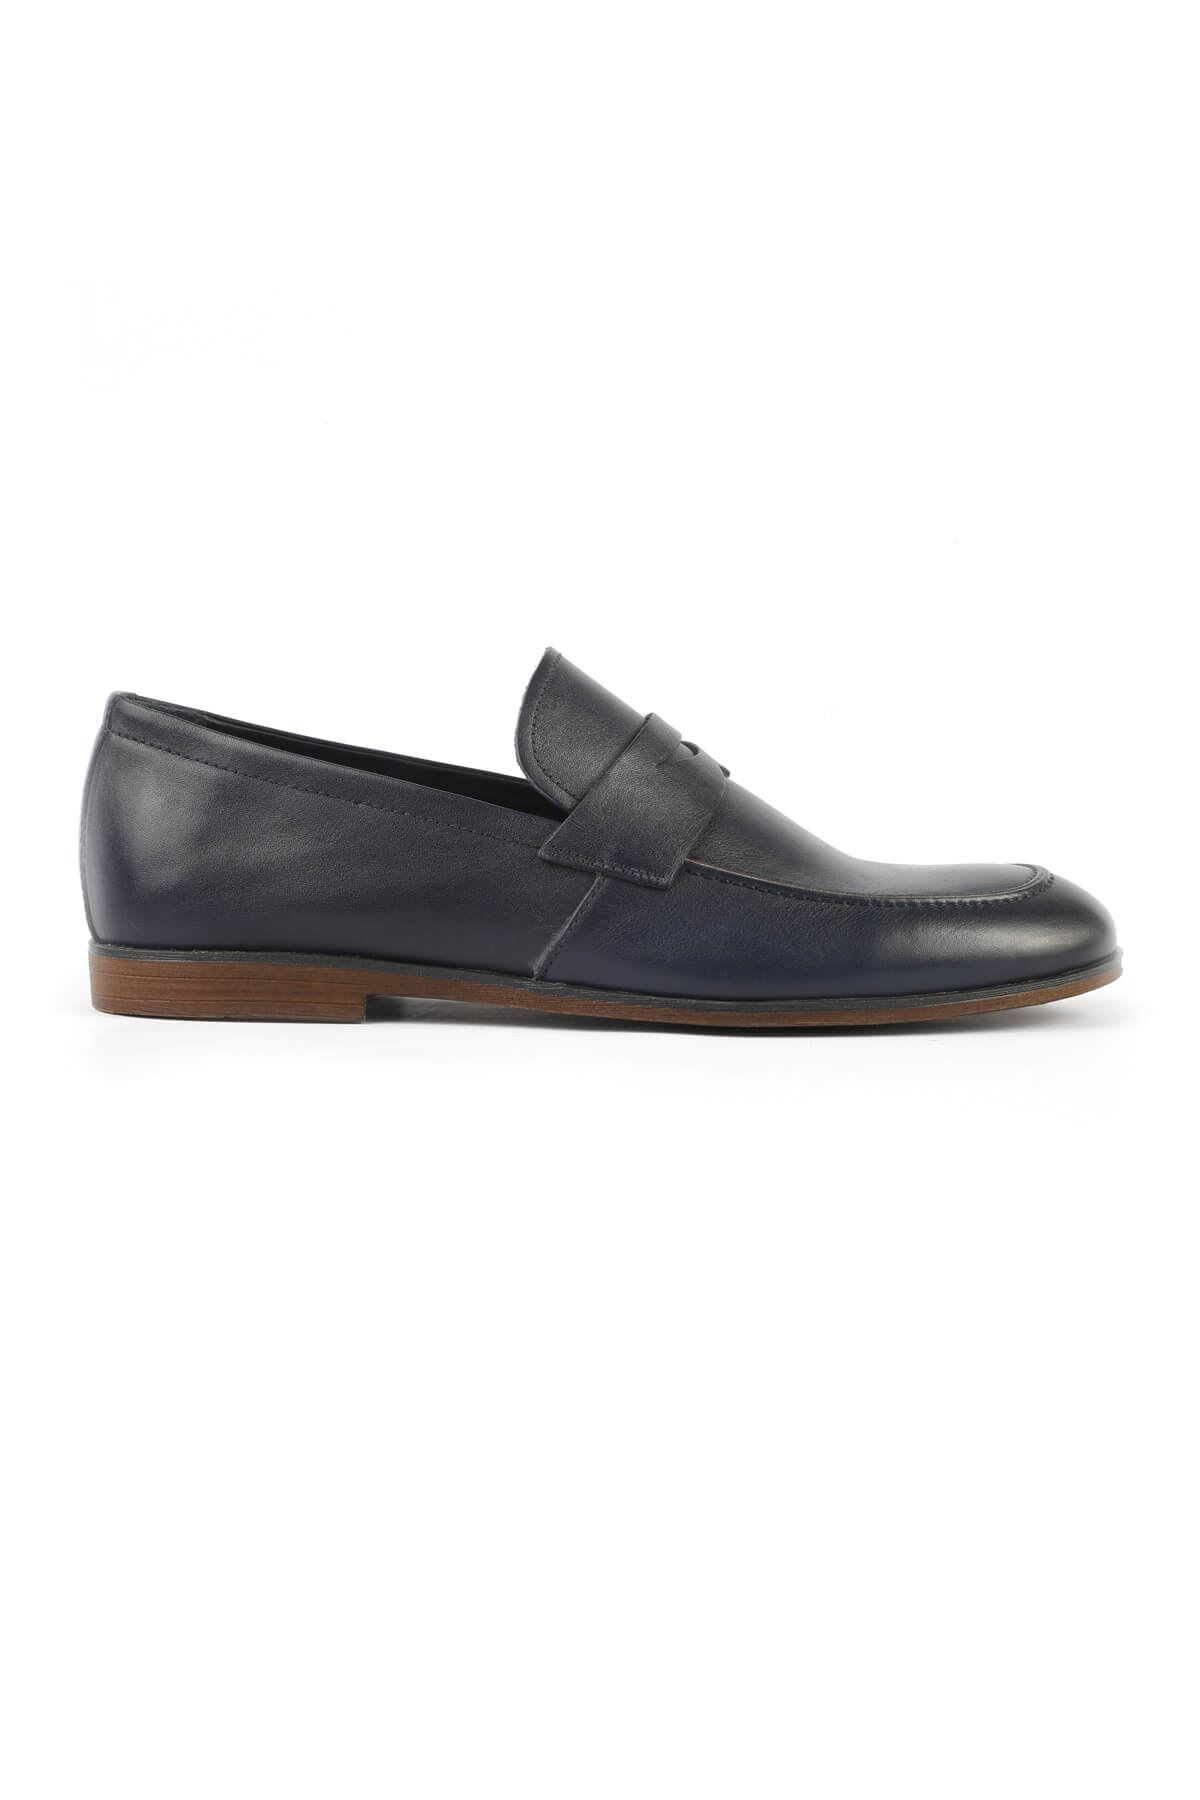 Libero L160 Navy Blue Loafer Shoes